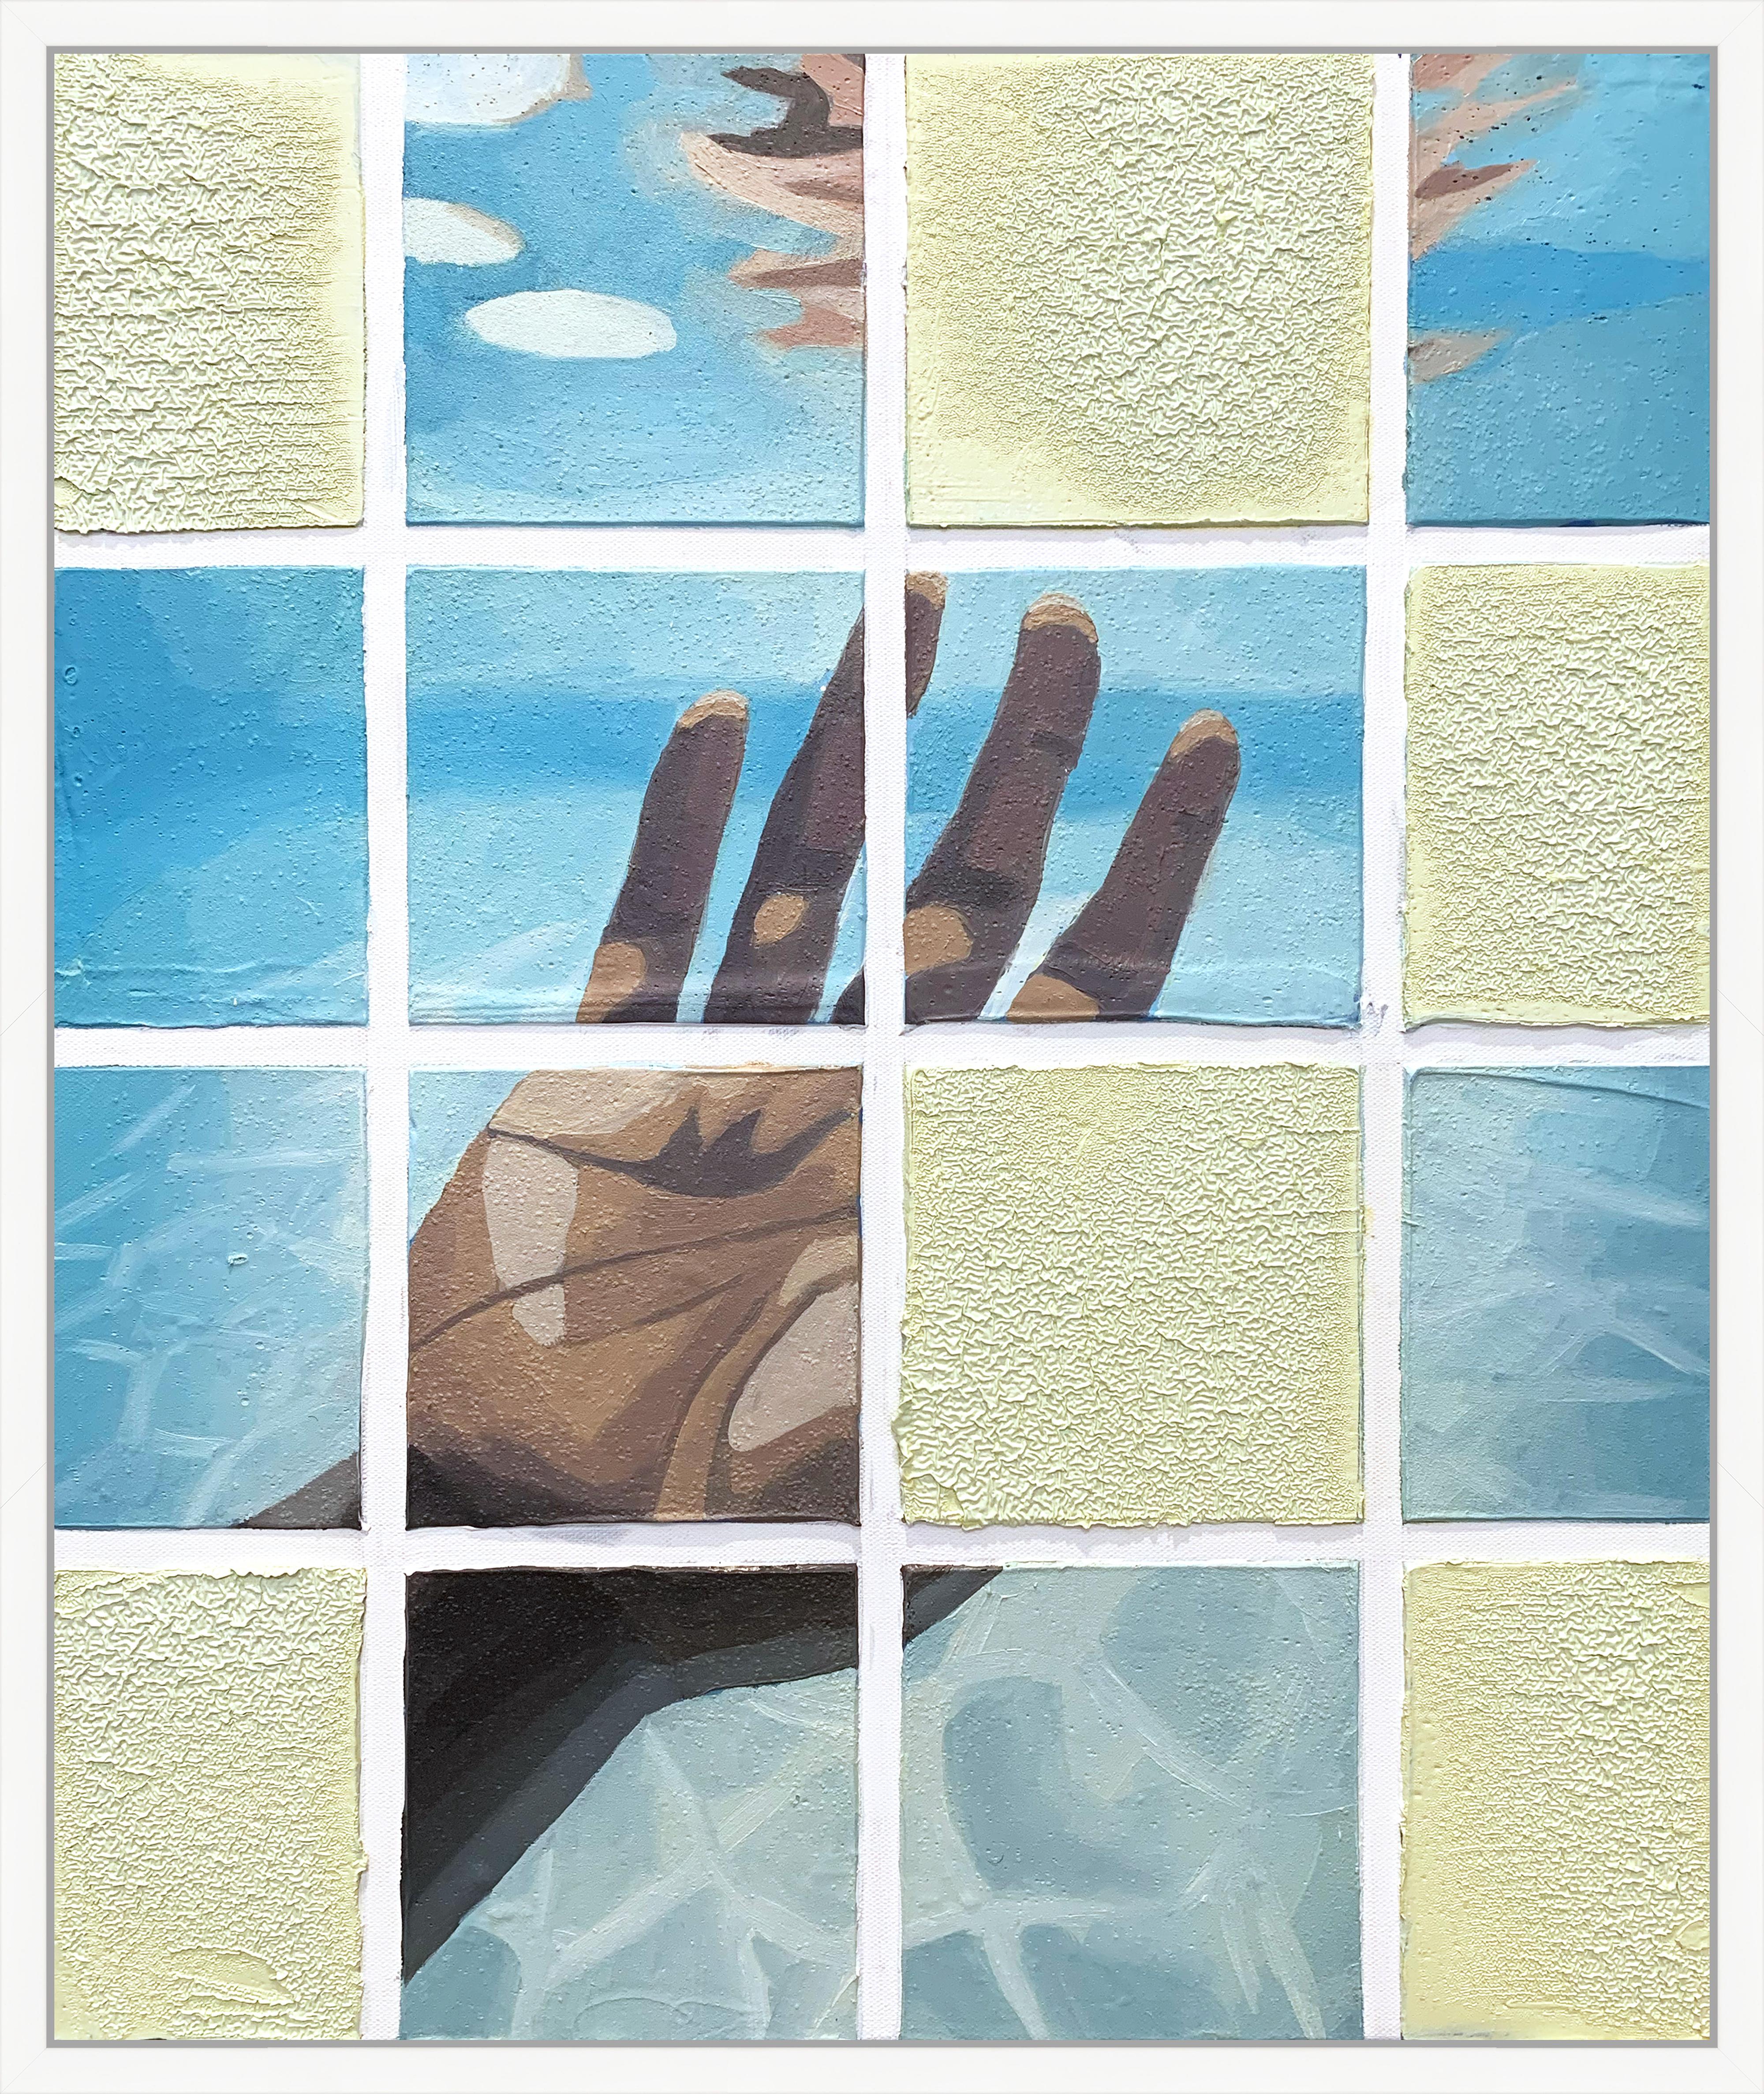 Andrew Gray Figurative Painting - "Hope Floats" - Original Acrylic Painting of Hand & Reflection, Serenity Theme